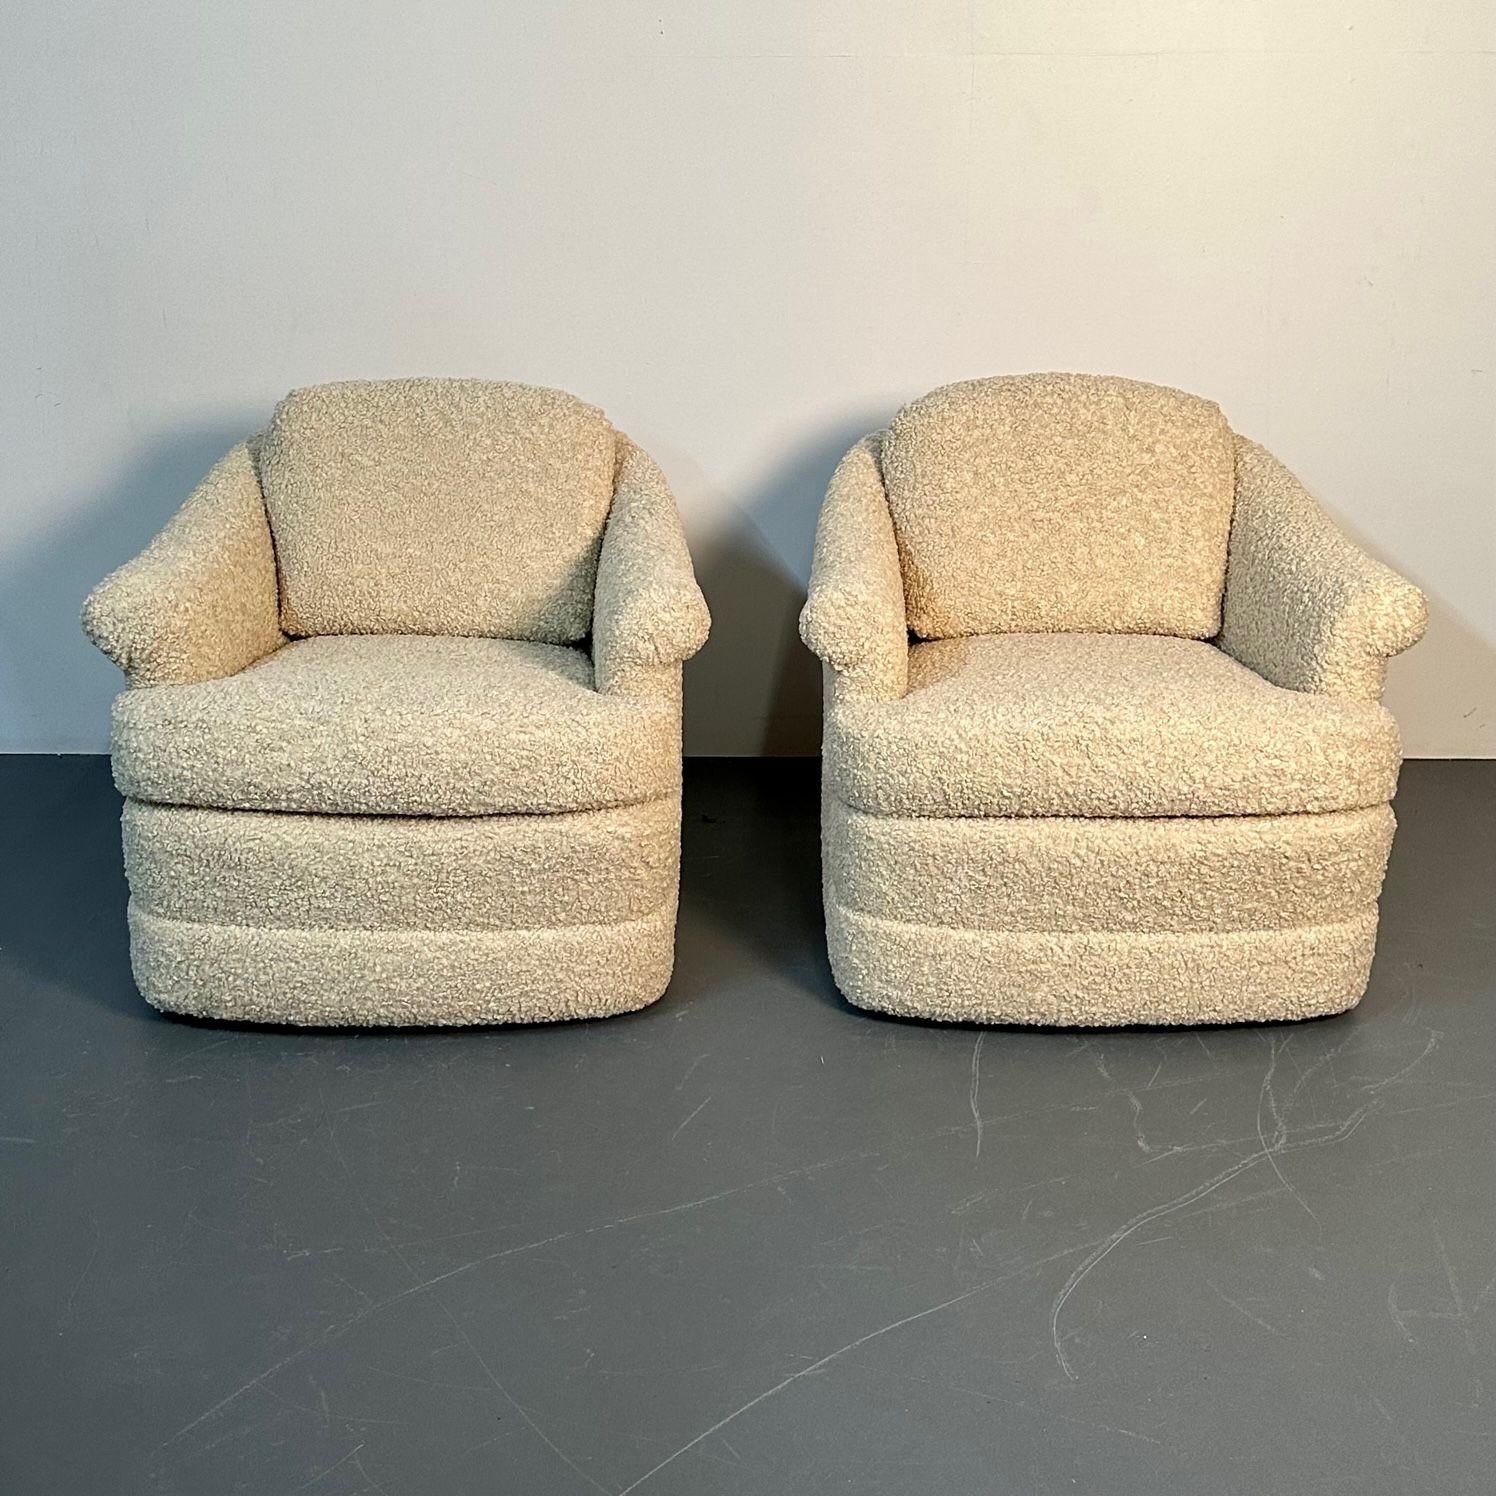 Pair of Mid-Century Modern Scroll Arm Traditional Lounge / Swivel Chairs, bouclé In Good Condition For Sale In Stamford, CT